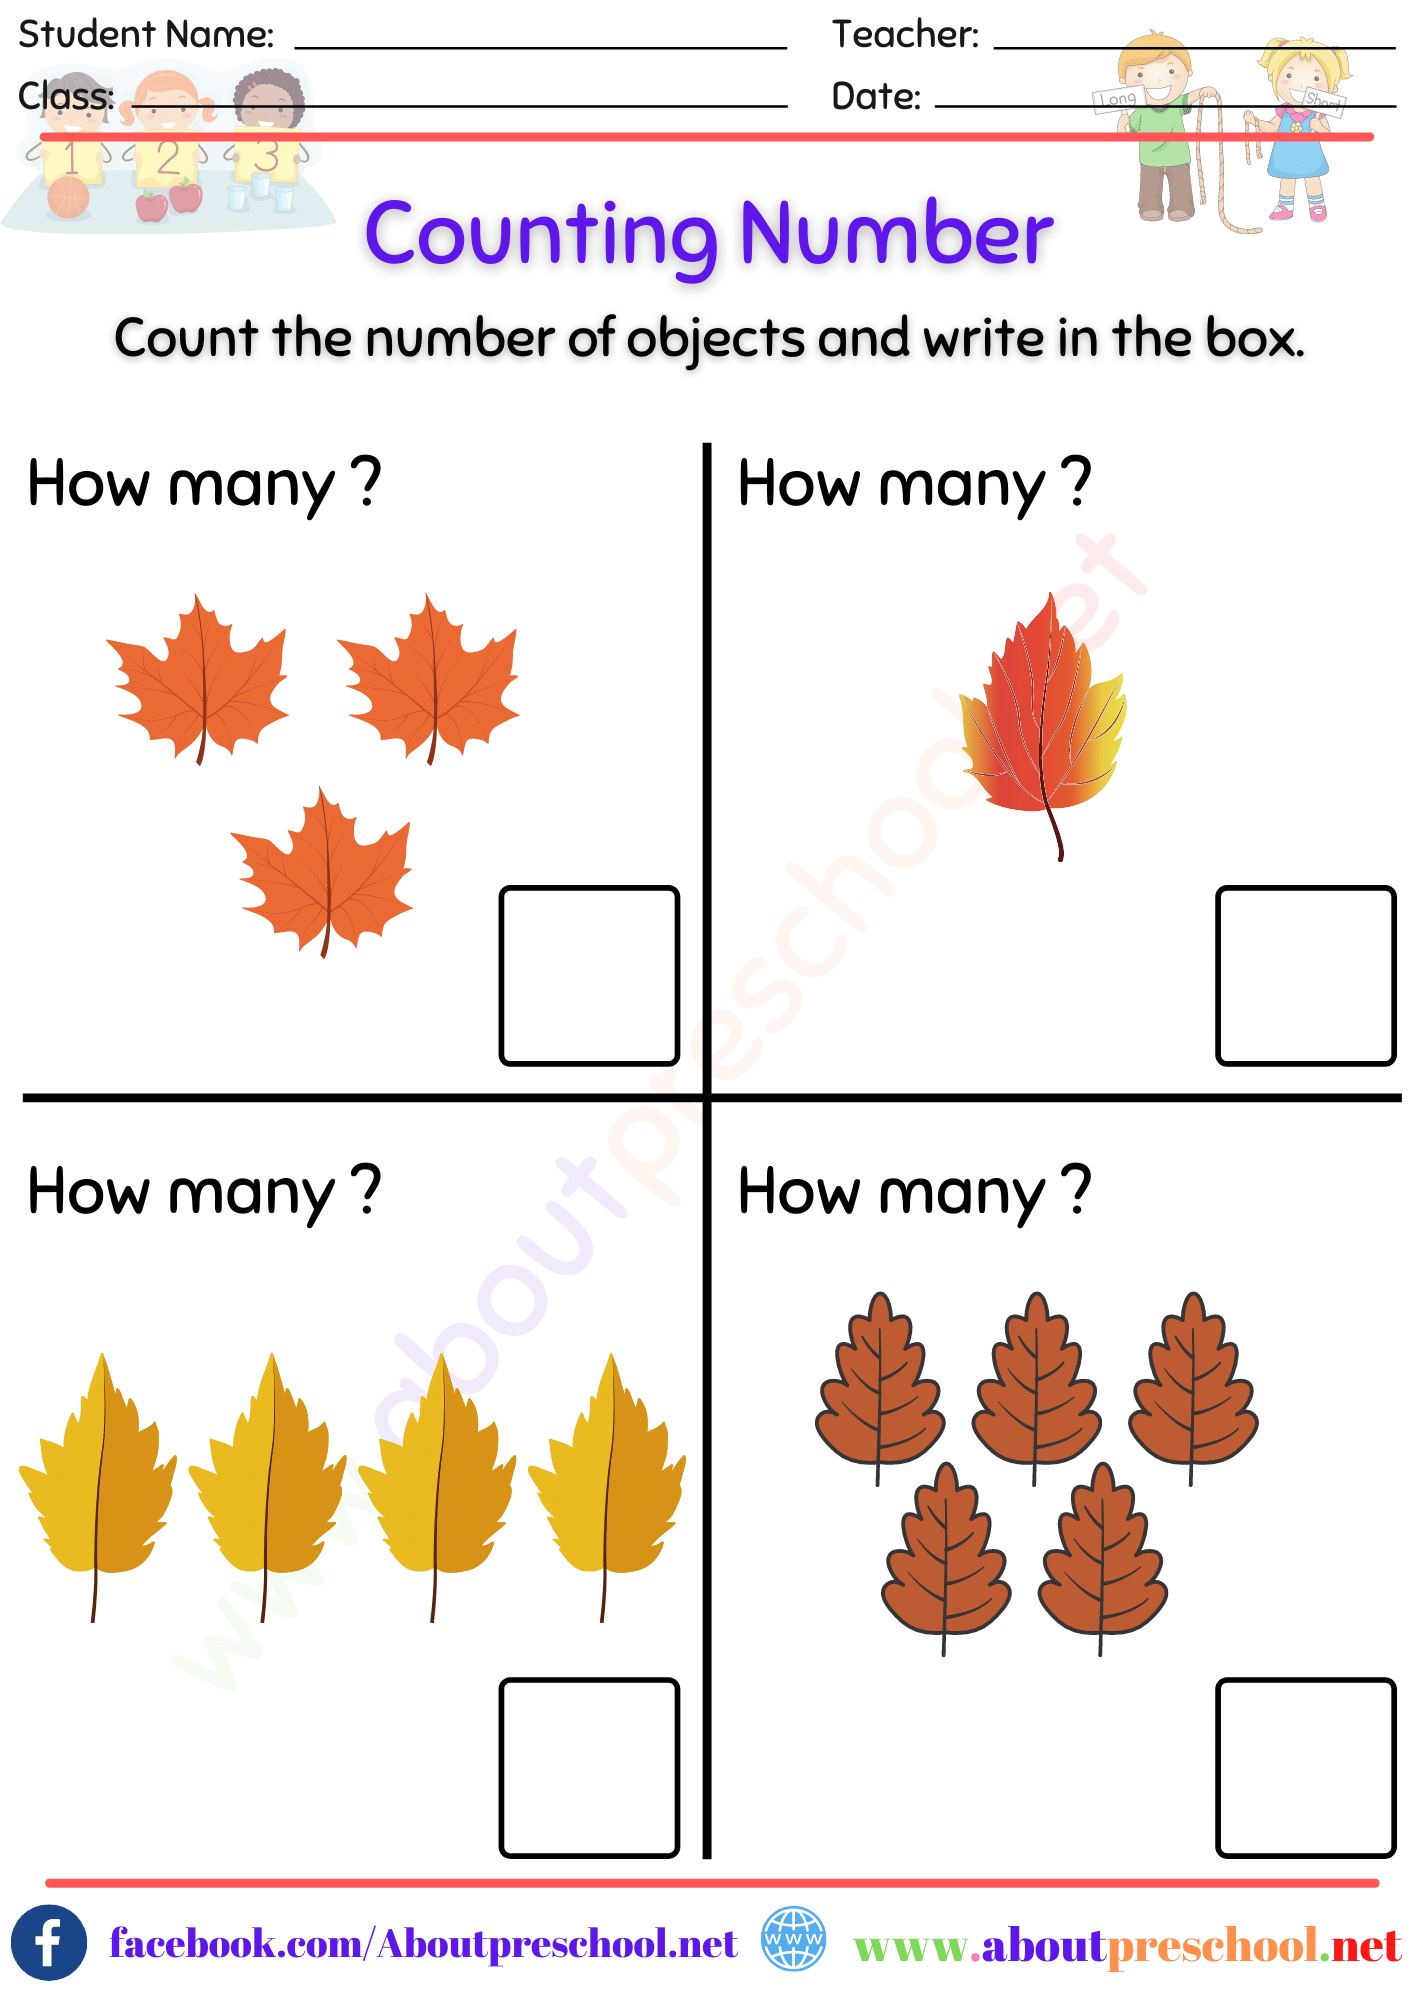 Counting Number 2